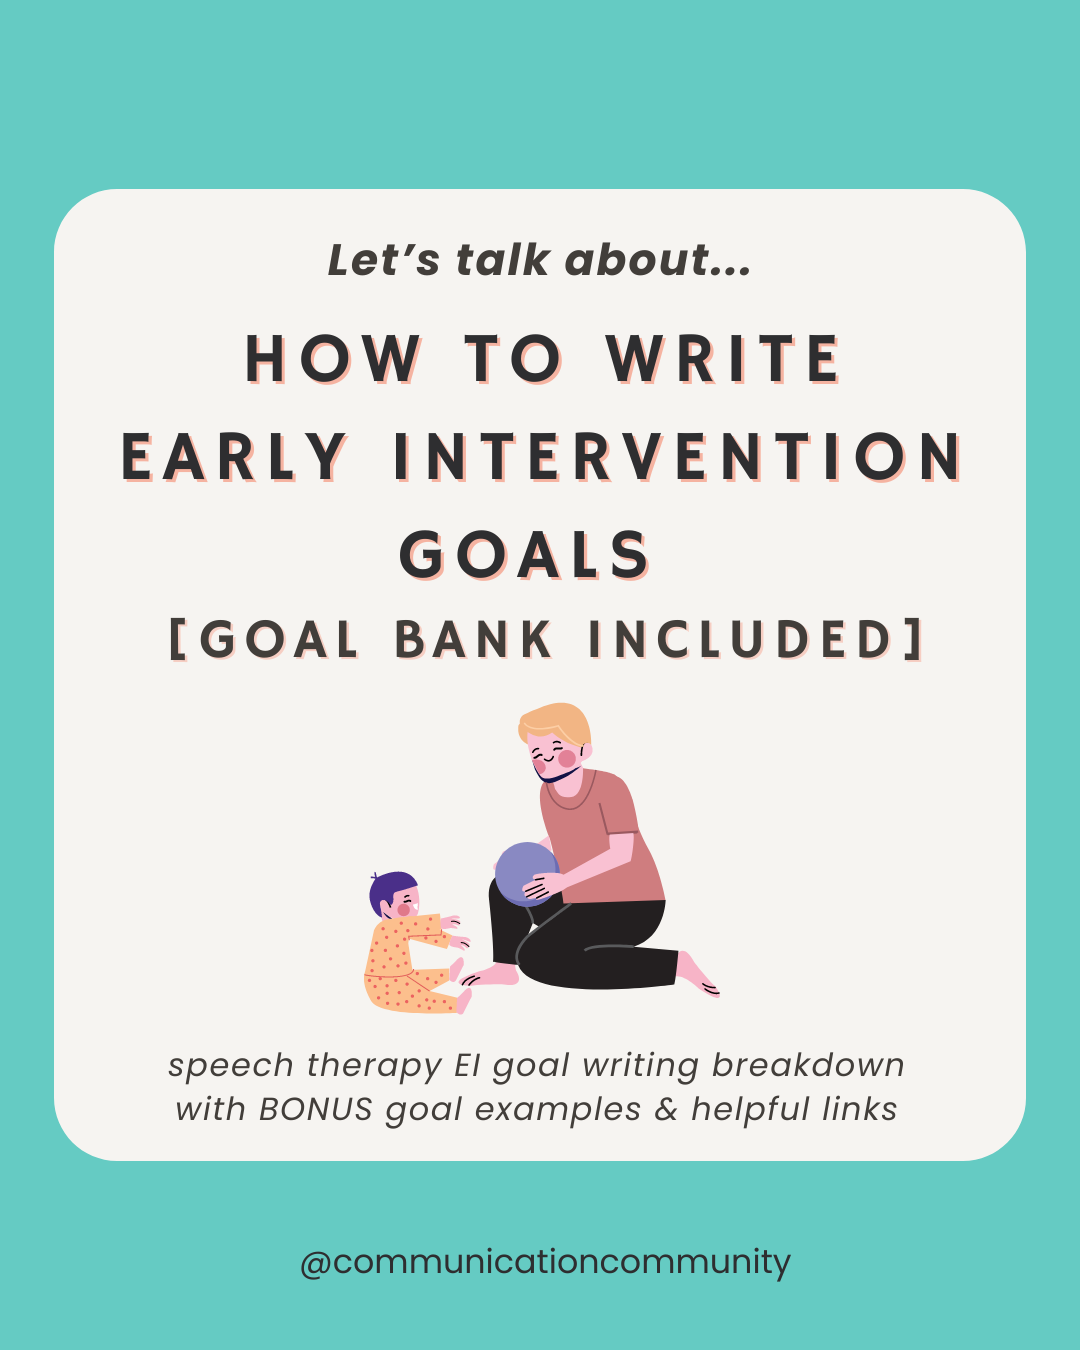 How to Write Early Intervention Goals for Speech Therapy [goal bank included]